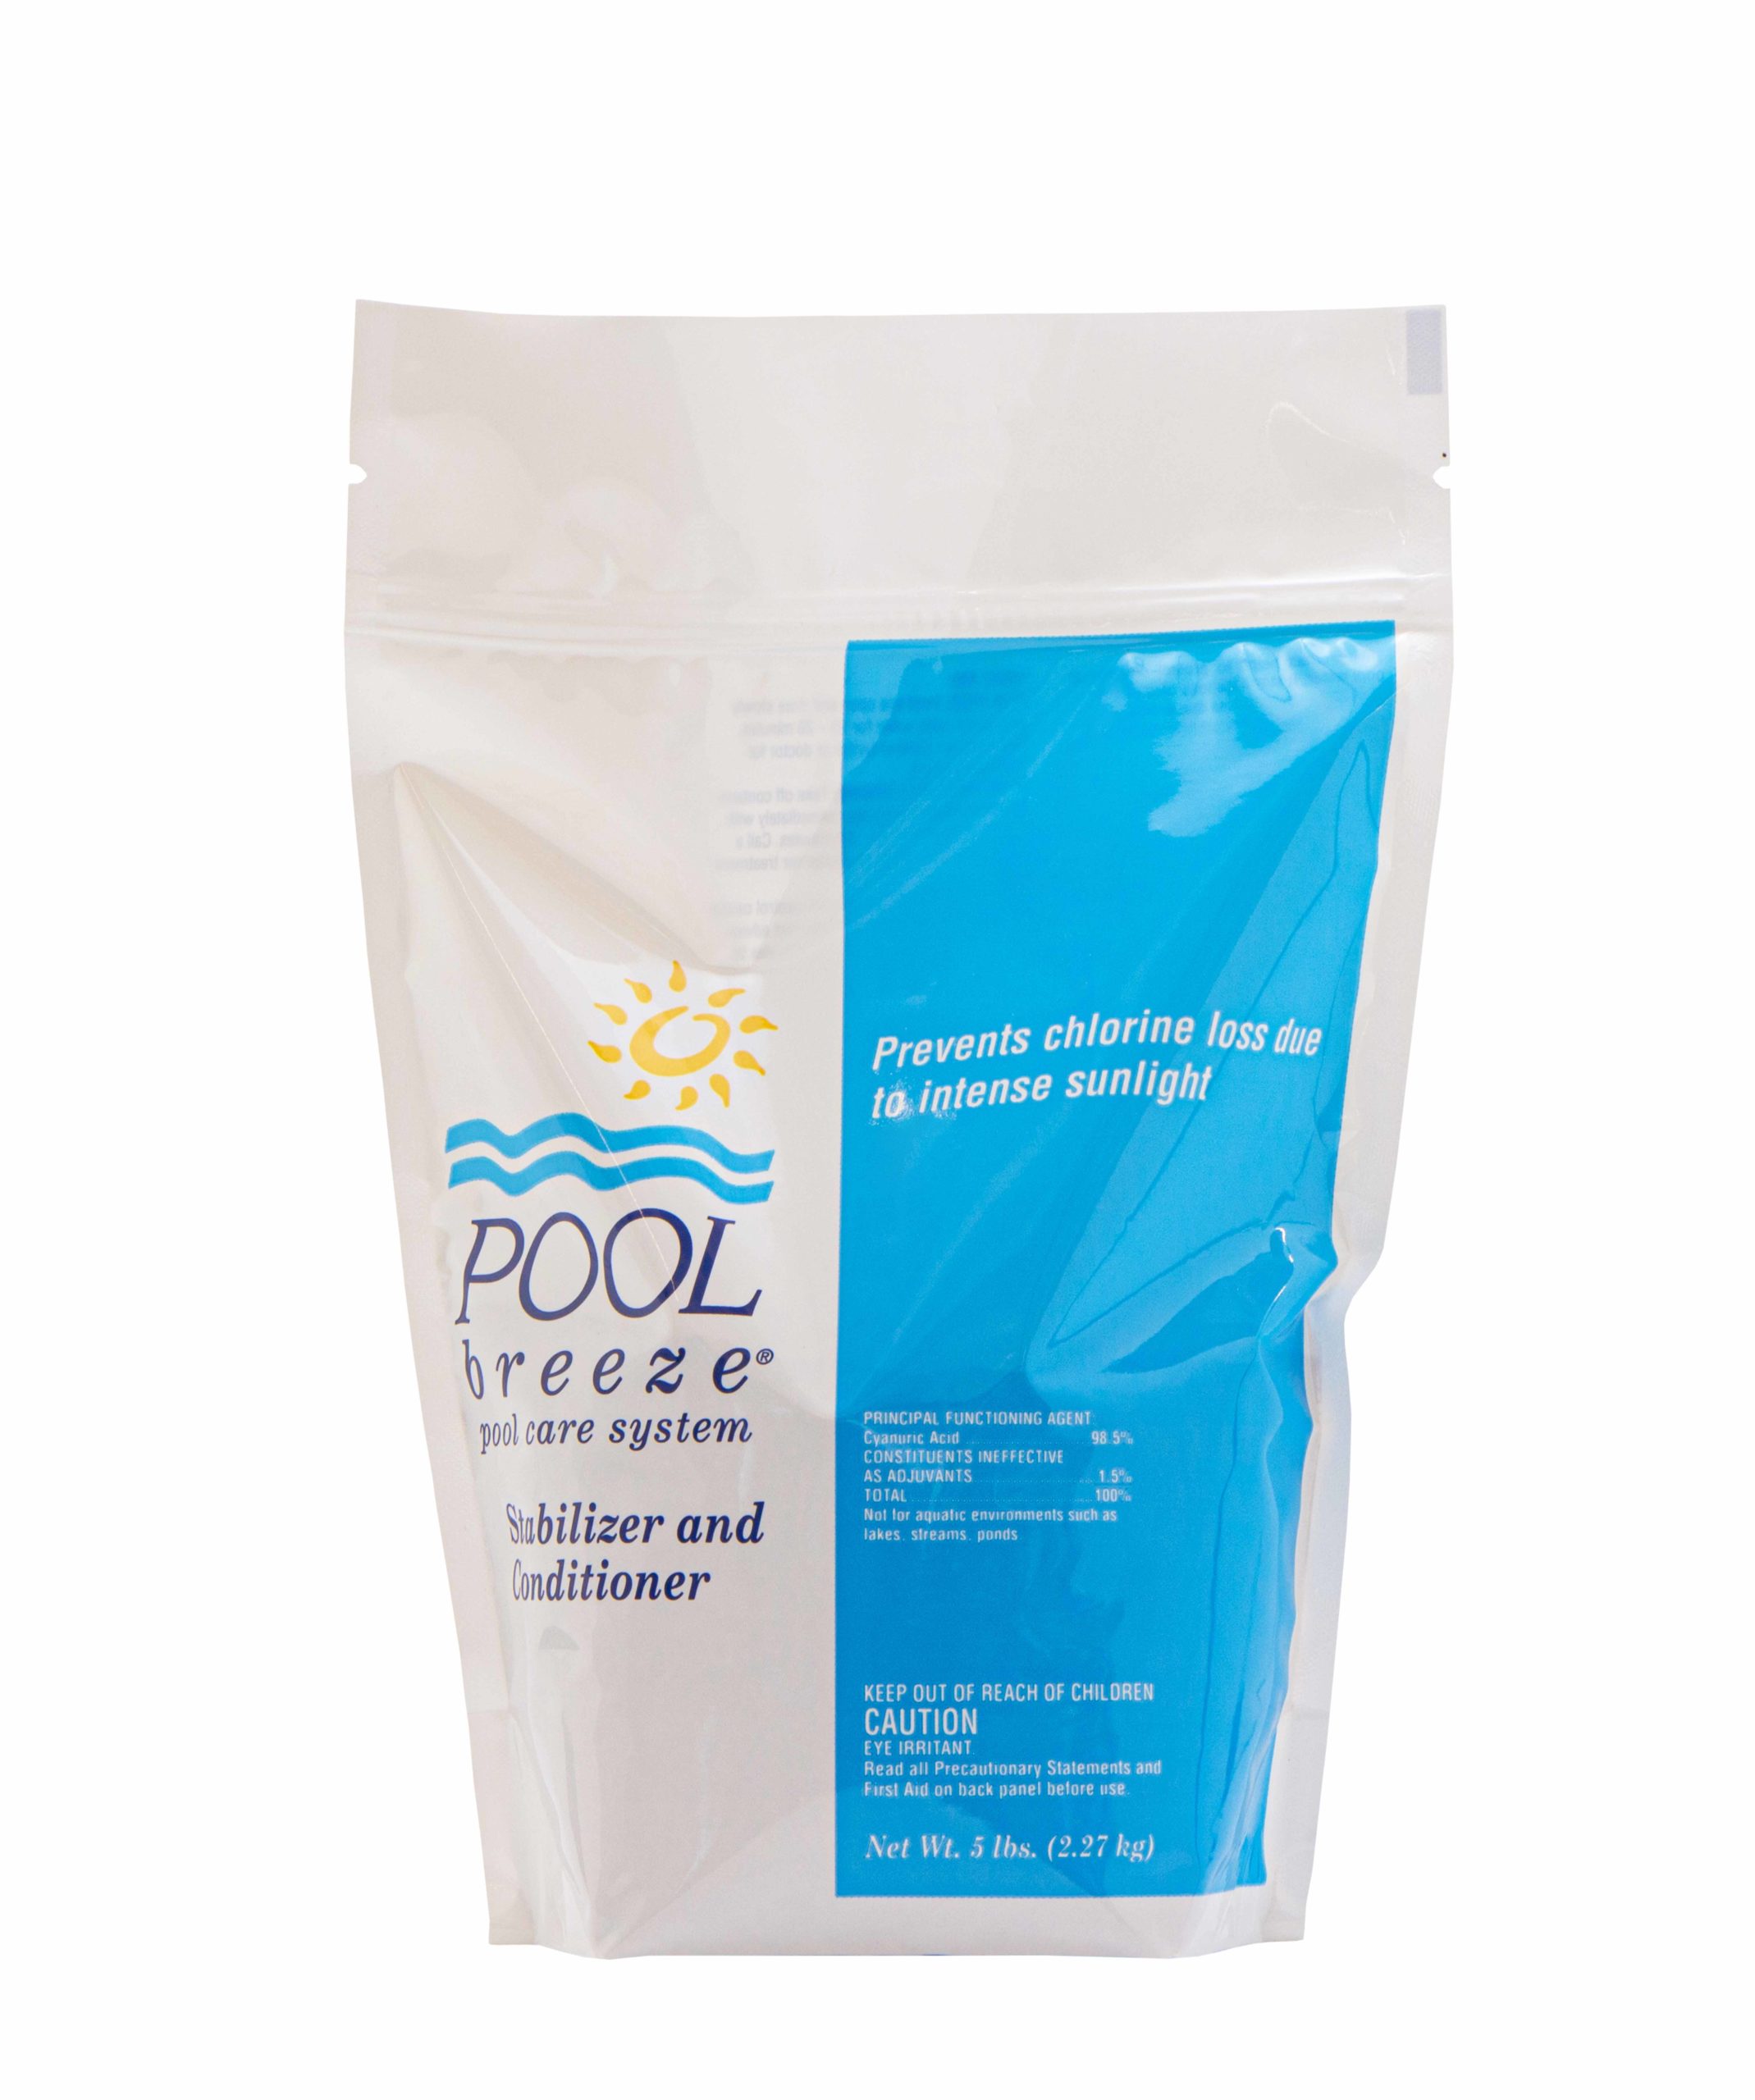 POOL Breeze Stabilizer and Conditioner